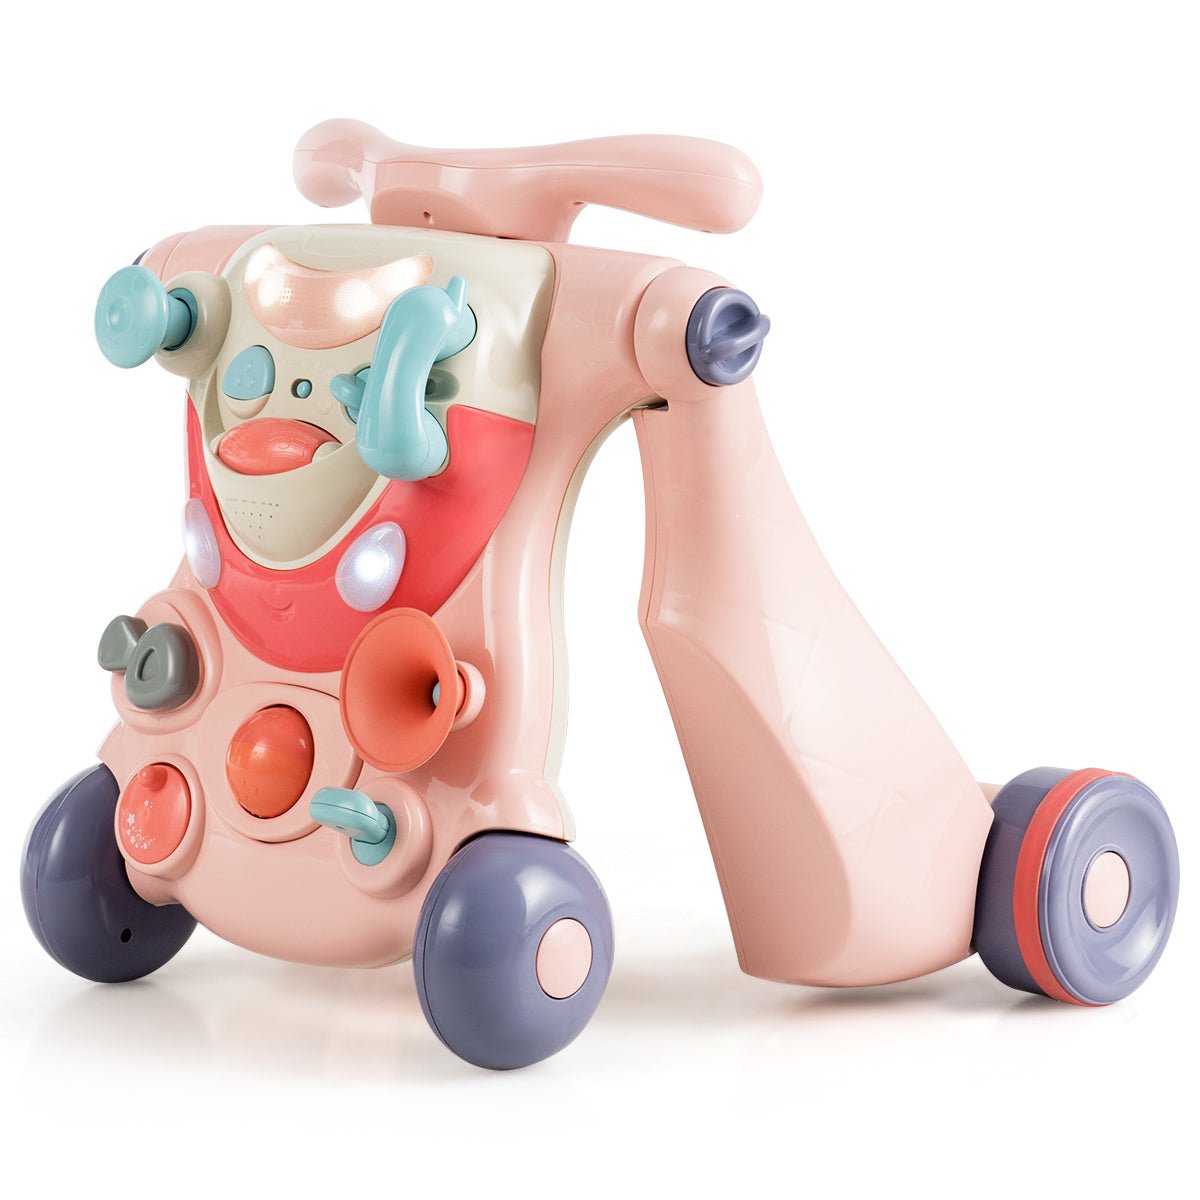 Engaging Baby Walker with Lights and Music for Sit-to-Stand Fun